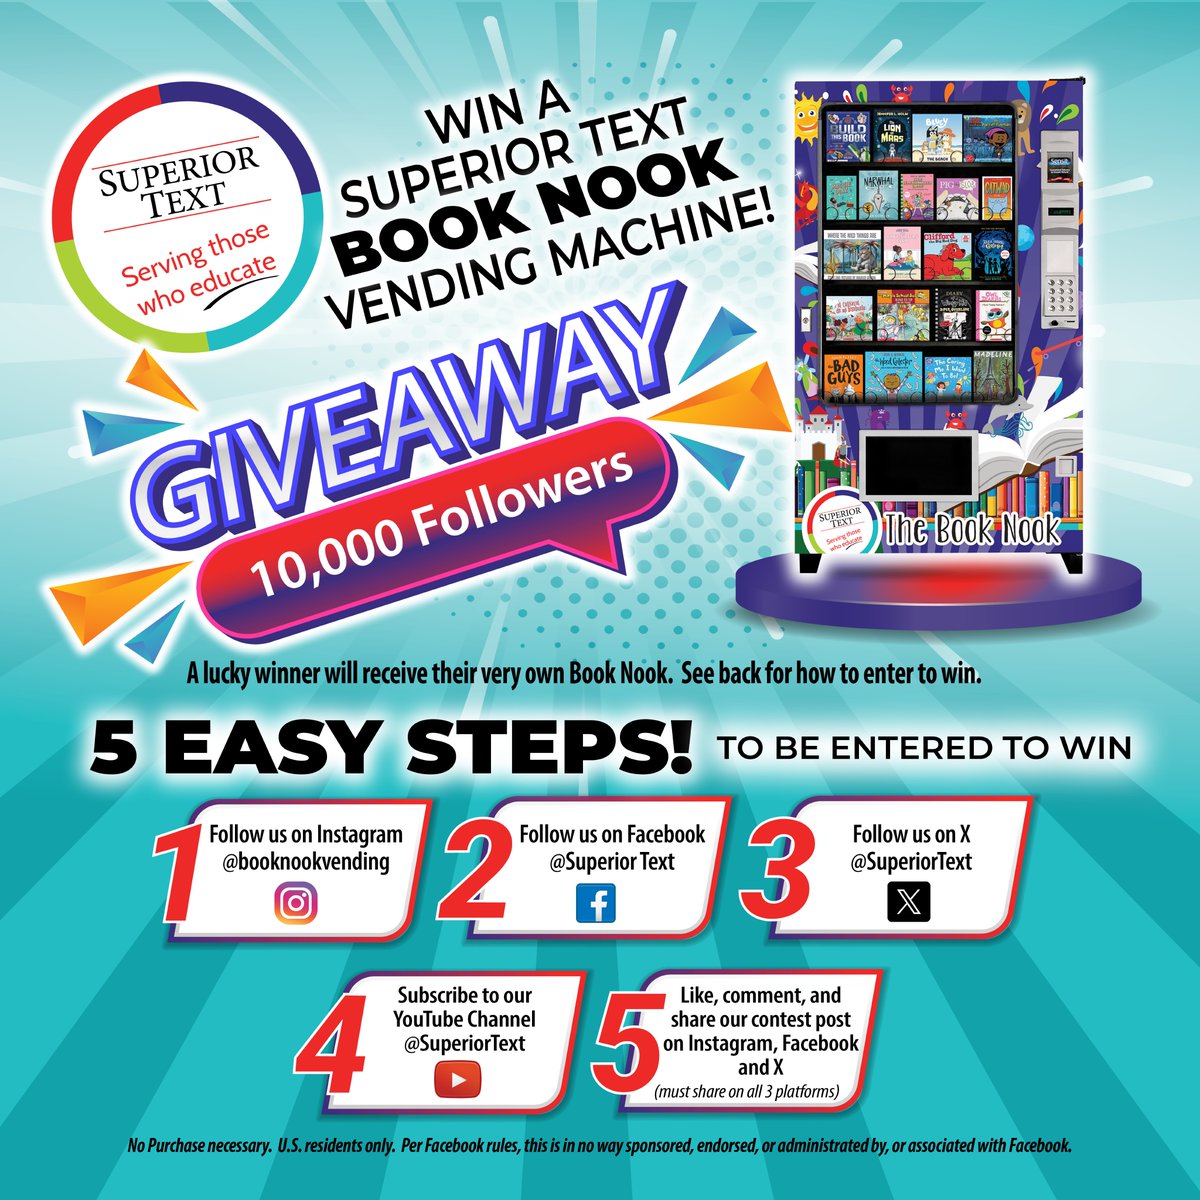 📚 Exciting News! 📚 We're giving away a FREE Book Nook vending machine! 🎉📖 To participate, simply follow these requirements: 1. Follow us on IG, Facebook, Twitter, X, and Youtube 2. Like, comment AND share our giveaway post on all platforms. #booknook #bookvendingmachine